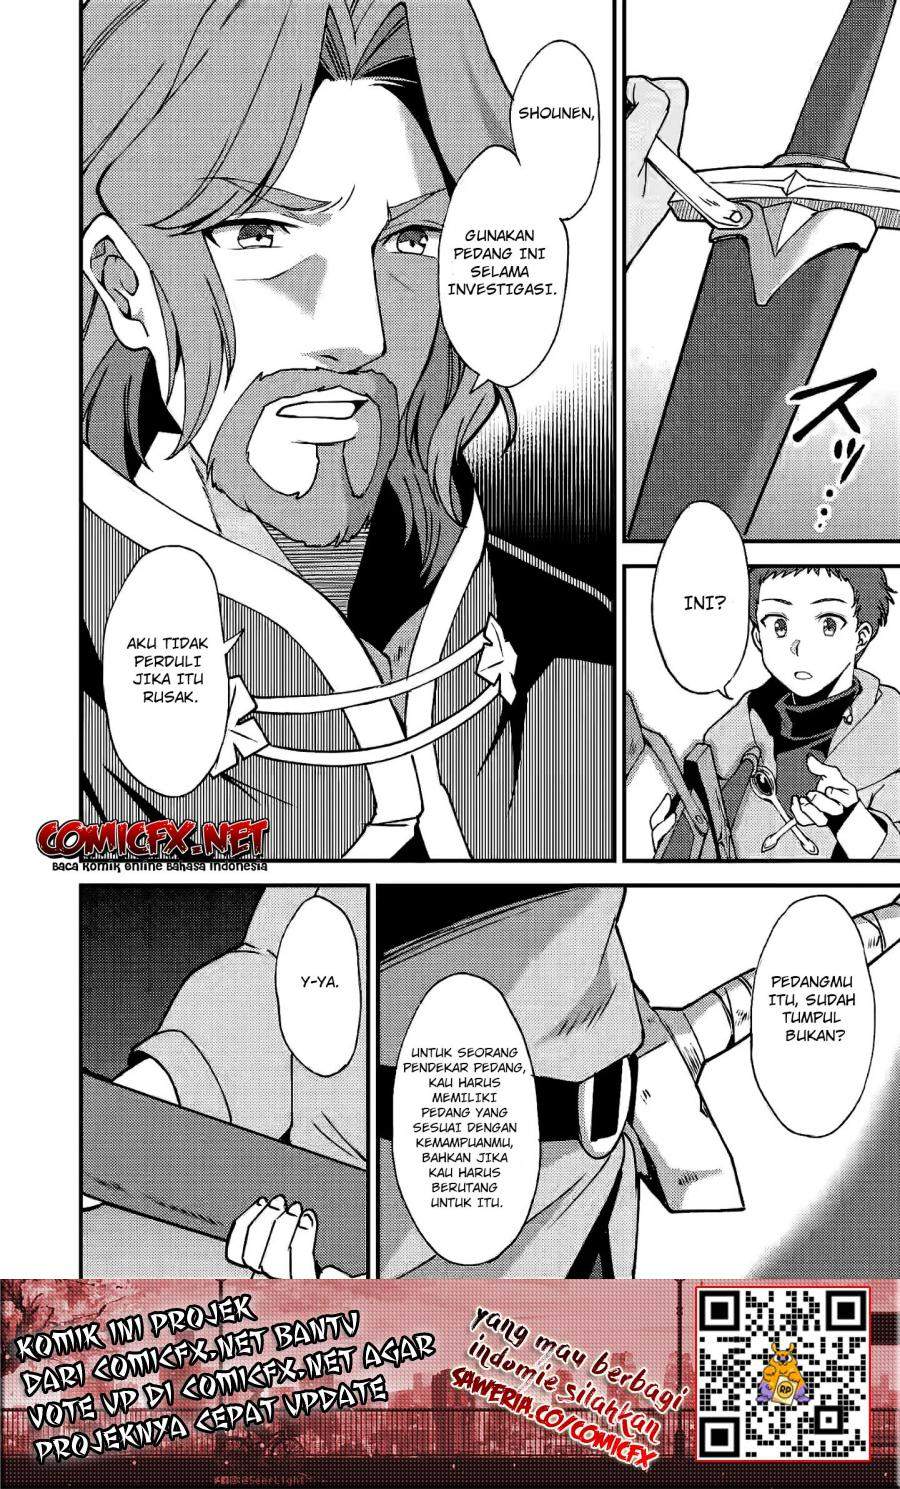 A Sword Master Childhood Friend Power Harassed Me Harshly, So I Broke off Our Relationship and Make a Fresh Start at the Frontier as a Magic Swordsman Chapter 06.2